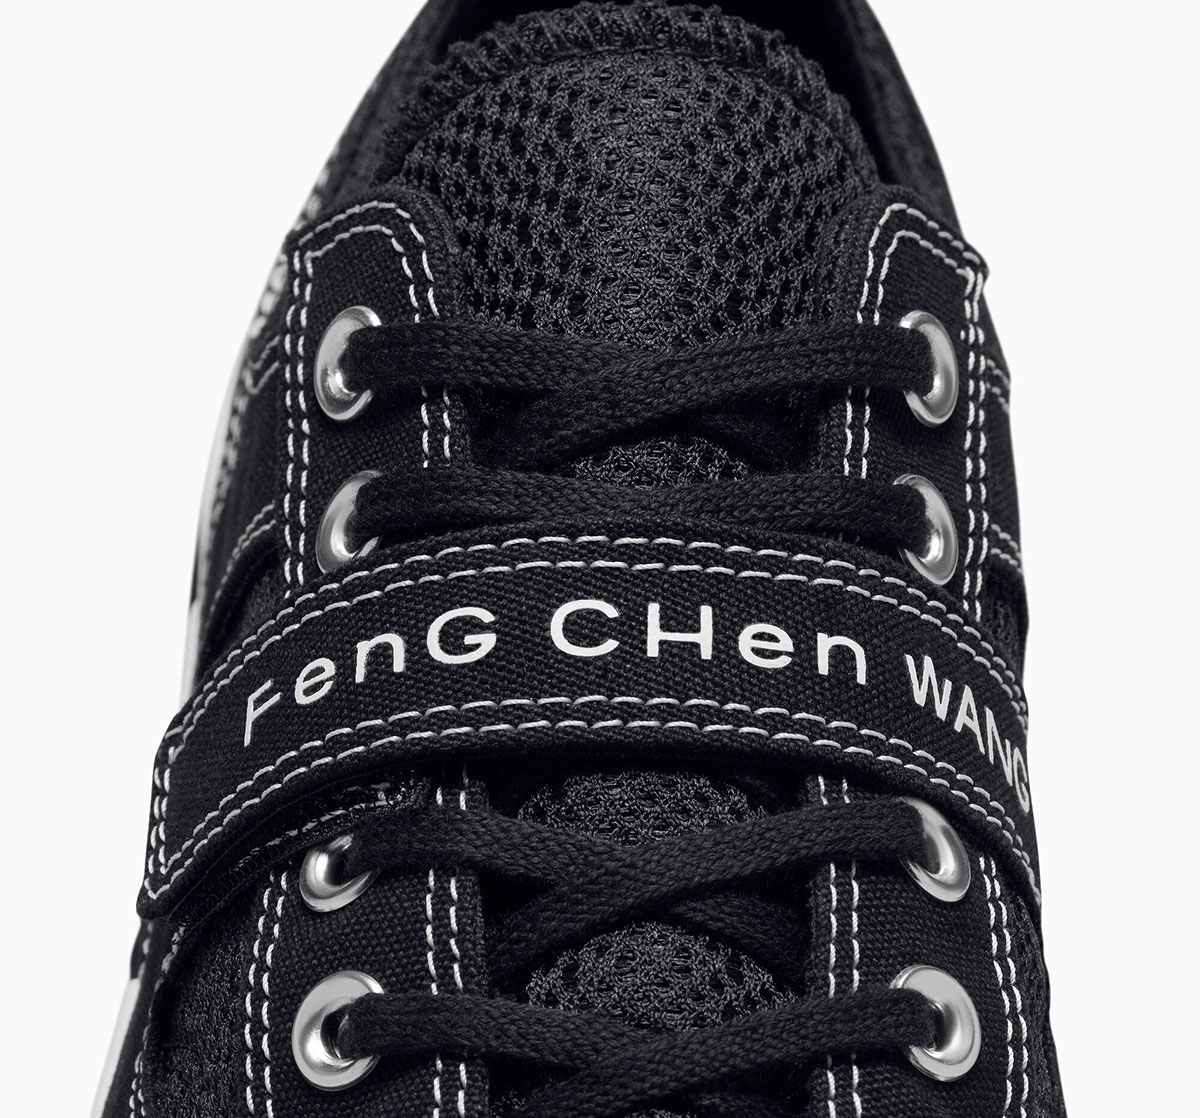 Feng Chen Wang x Converse lace-up sneakers A08858c 7